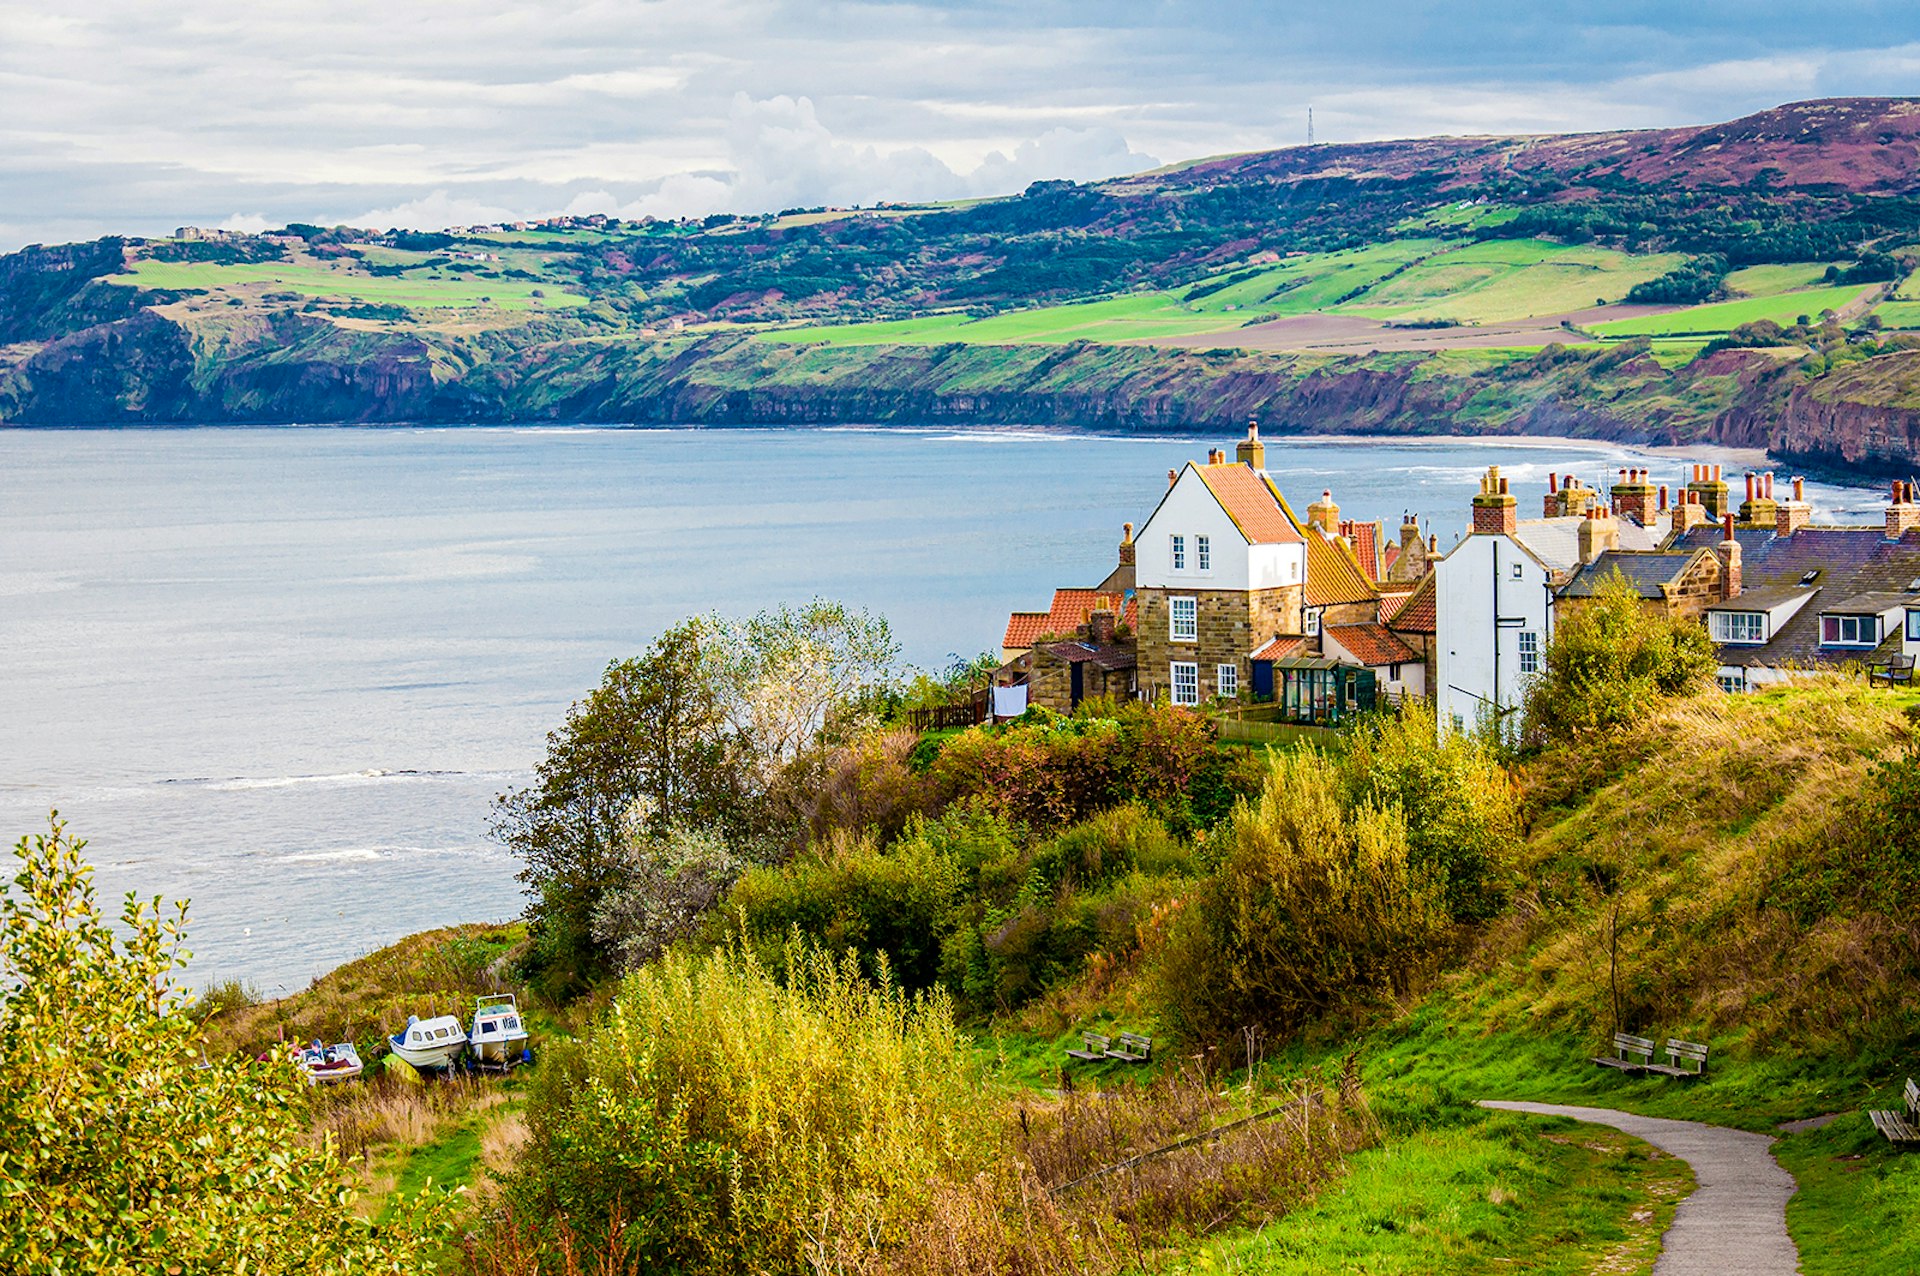 A small path leads to a fishing community with historic white buildings with orange roofs. The town sits on the edge of a bay with rolling green hills in the background. England.